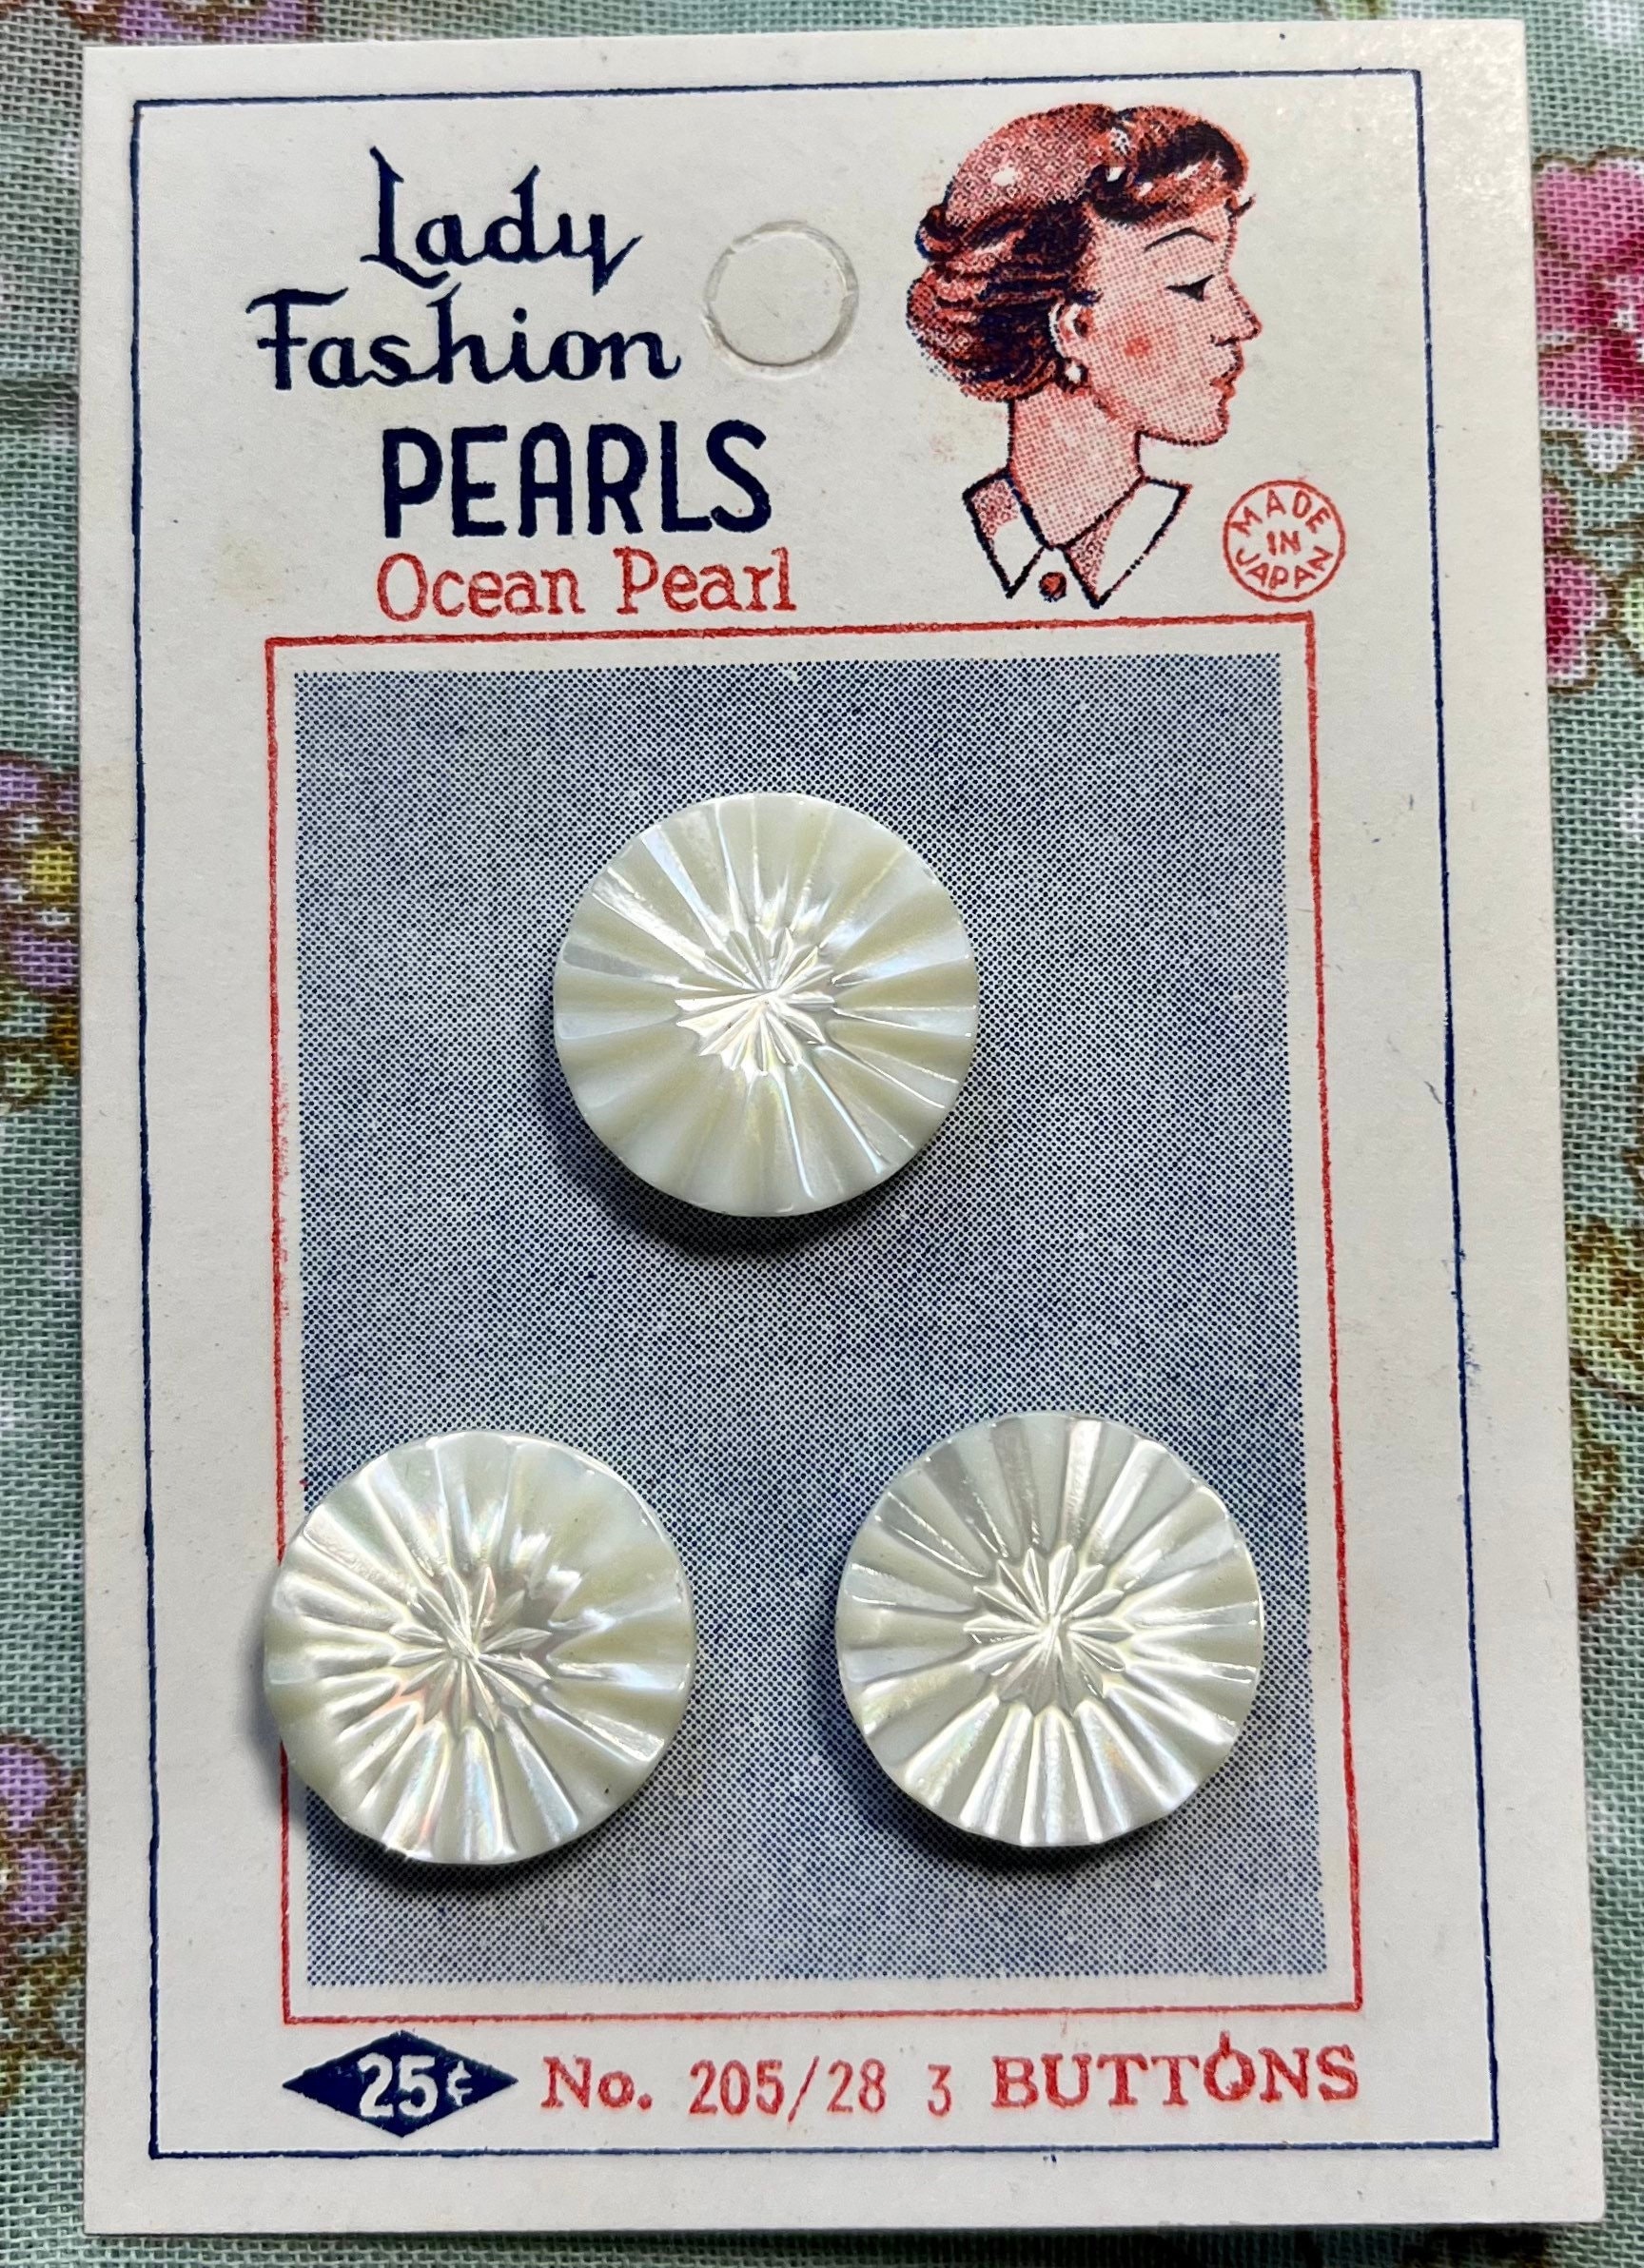 Pearlized Buttons, SIZE 5/16 9 Mm. 1/2 Ball Pearl Buttons With Wire Shank,  , Lots of 100-50-25-10 Pick QTY at Check Out. 